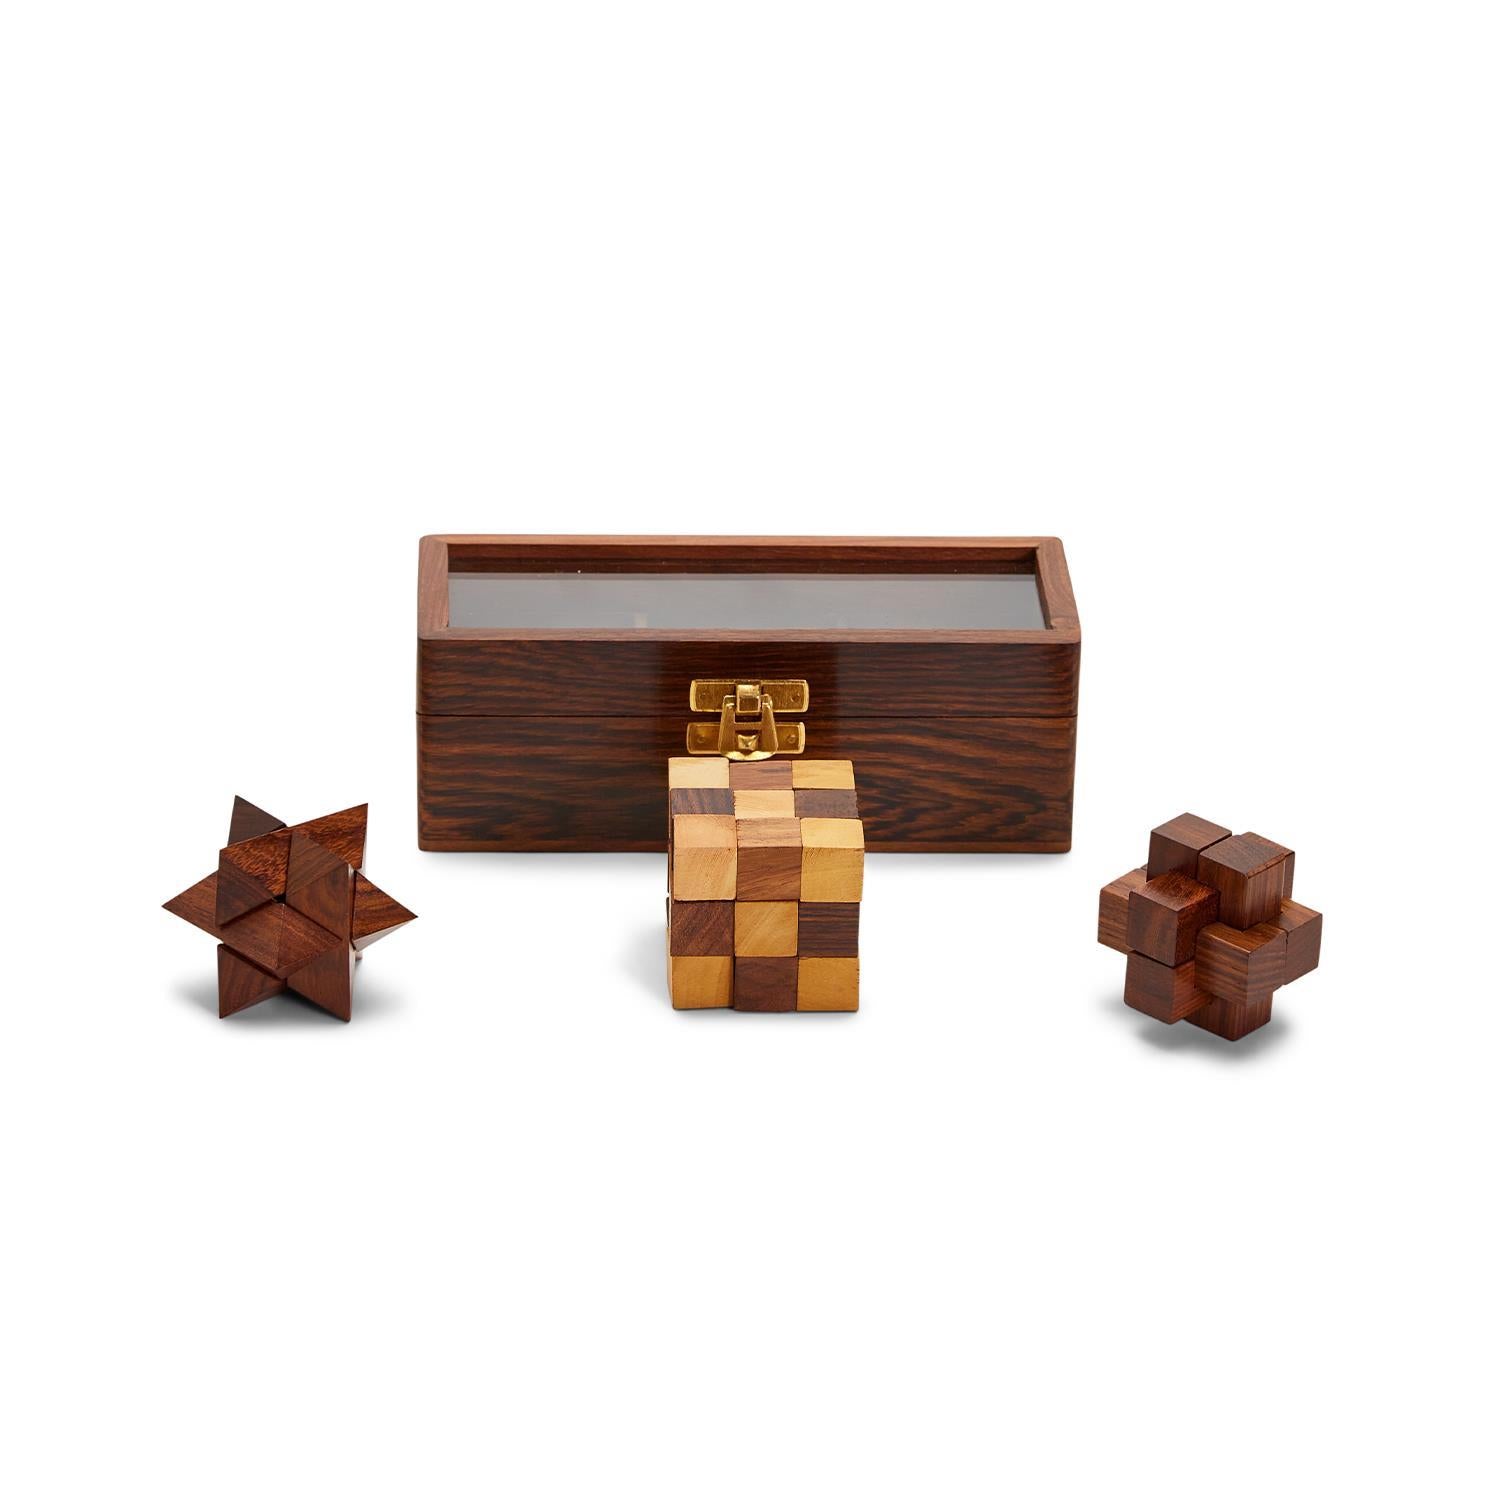 The Turf Club Set of 3 Puzzles in Hand-Crafted Storage Box Includes 3 Shapes